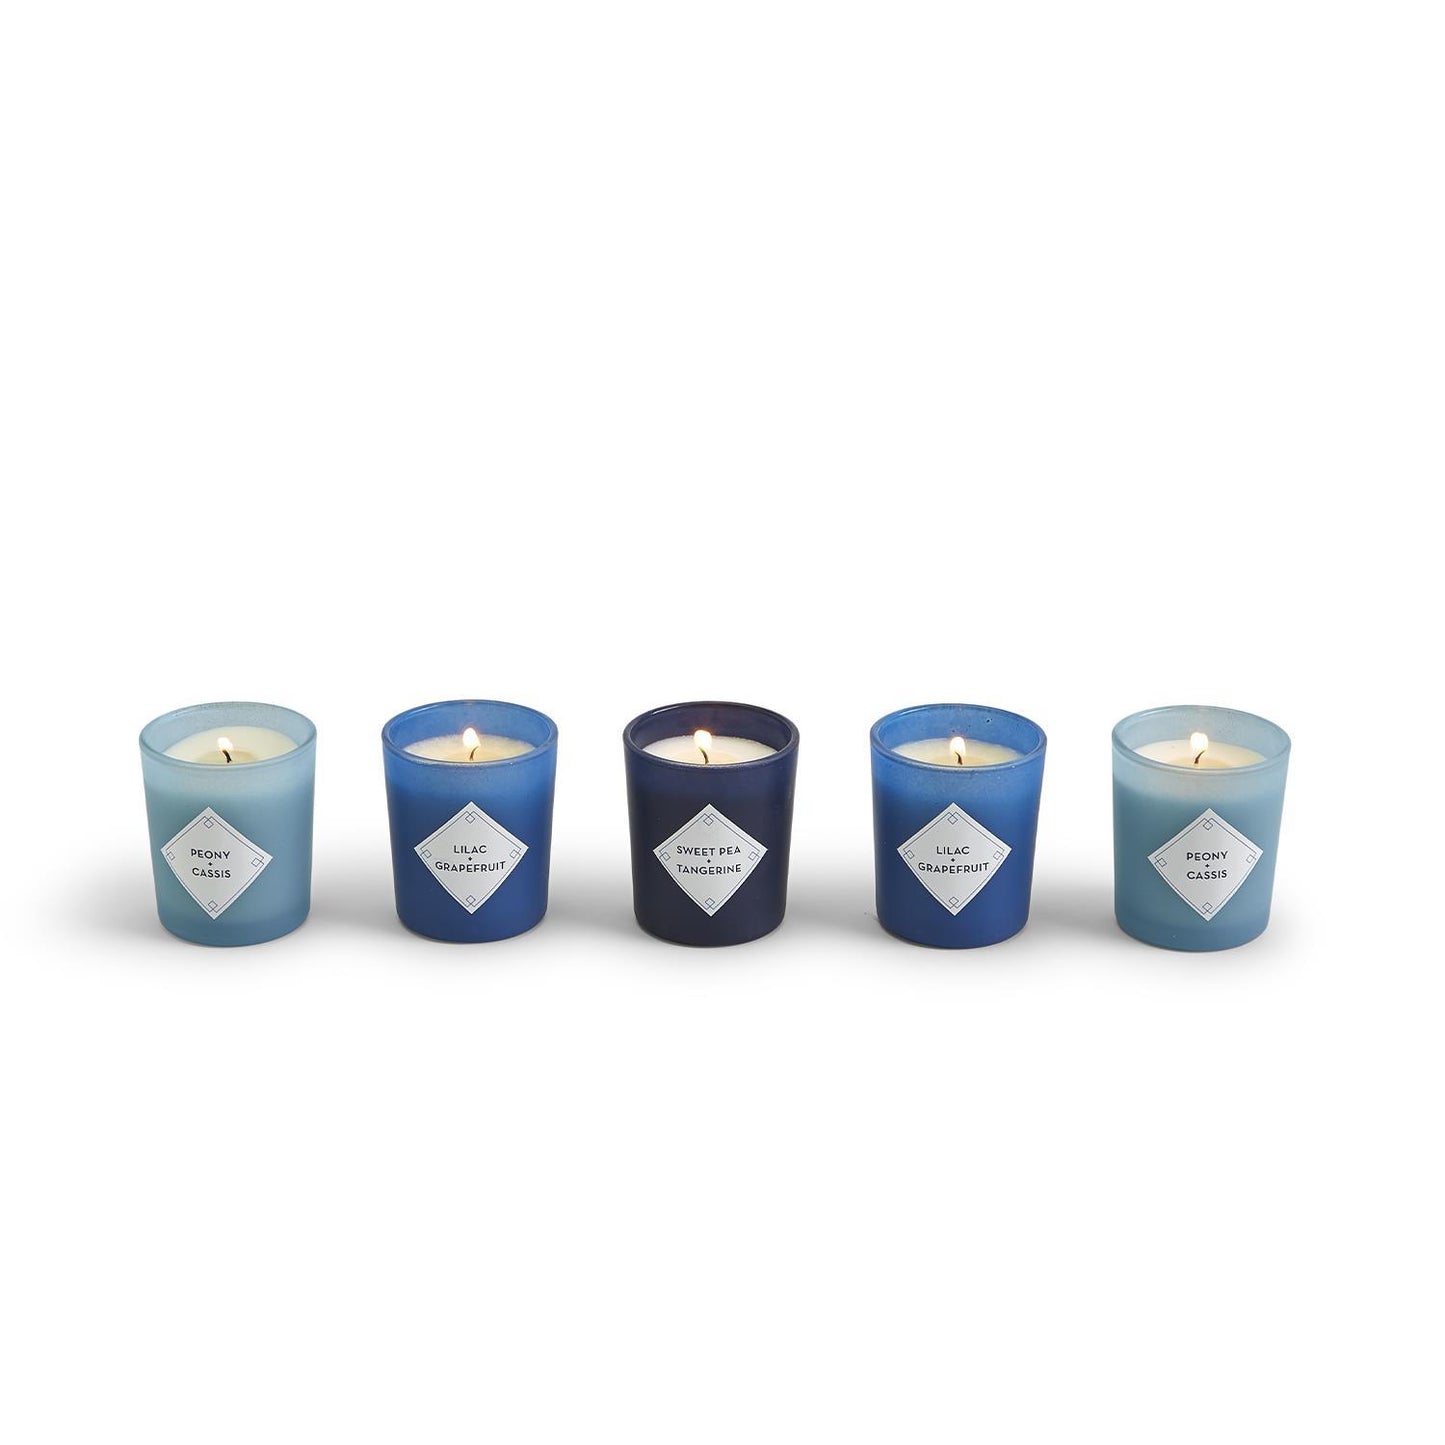 Blue Willow Set of 5 Scented Candles in Gift Box